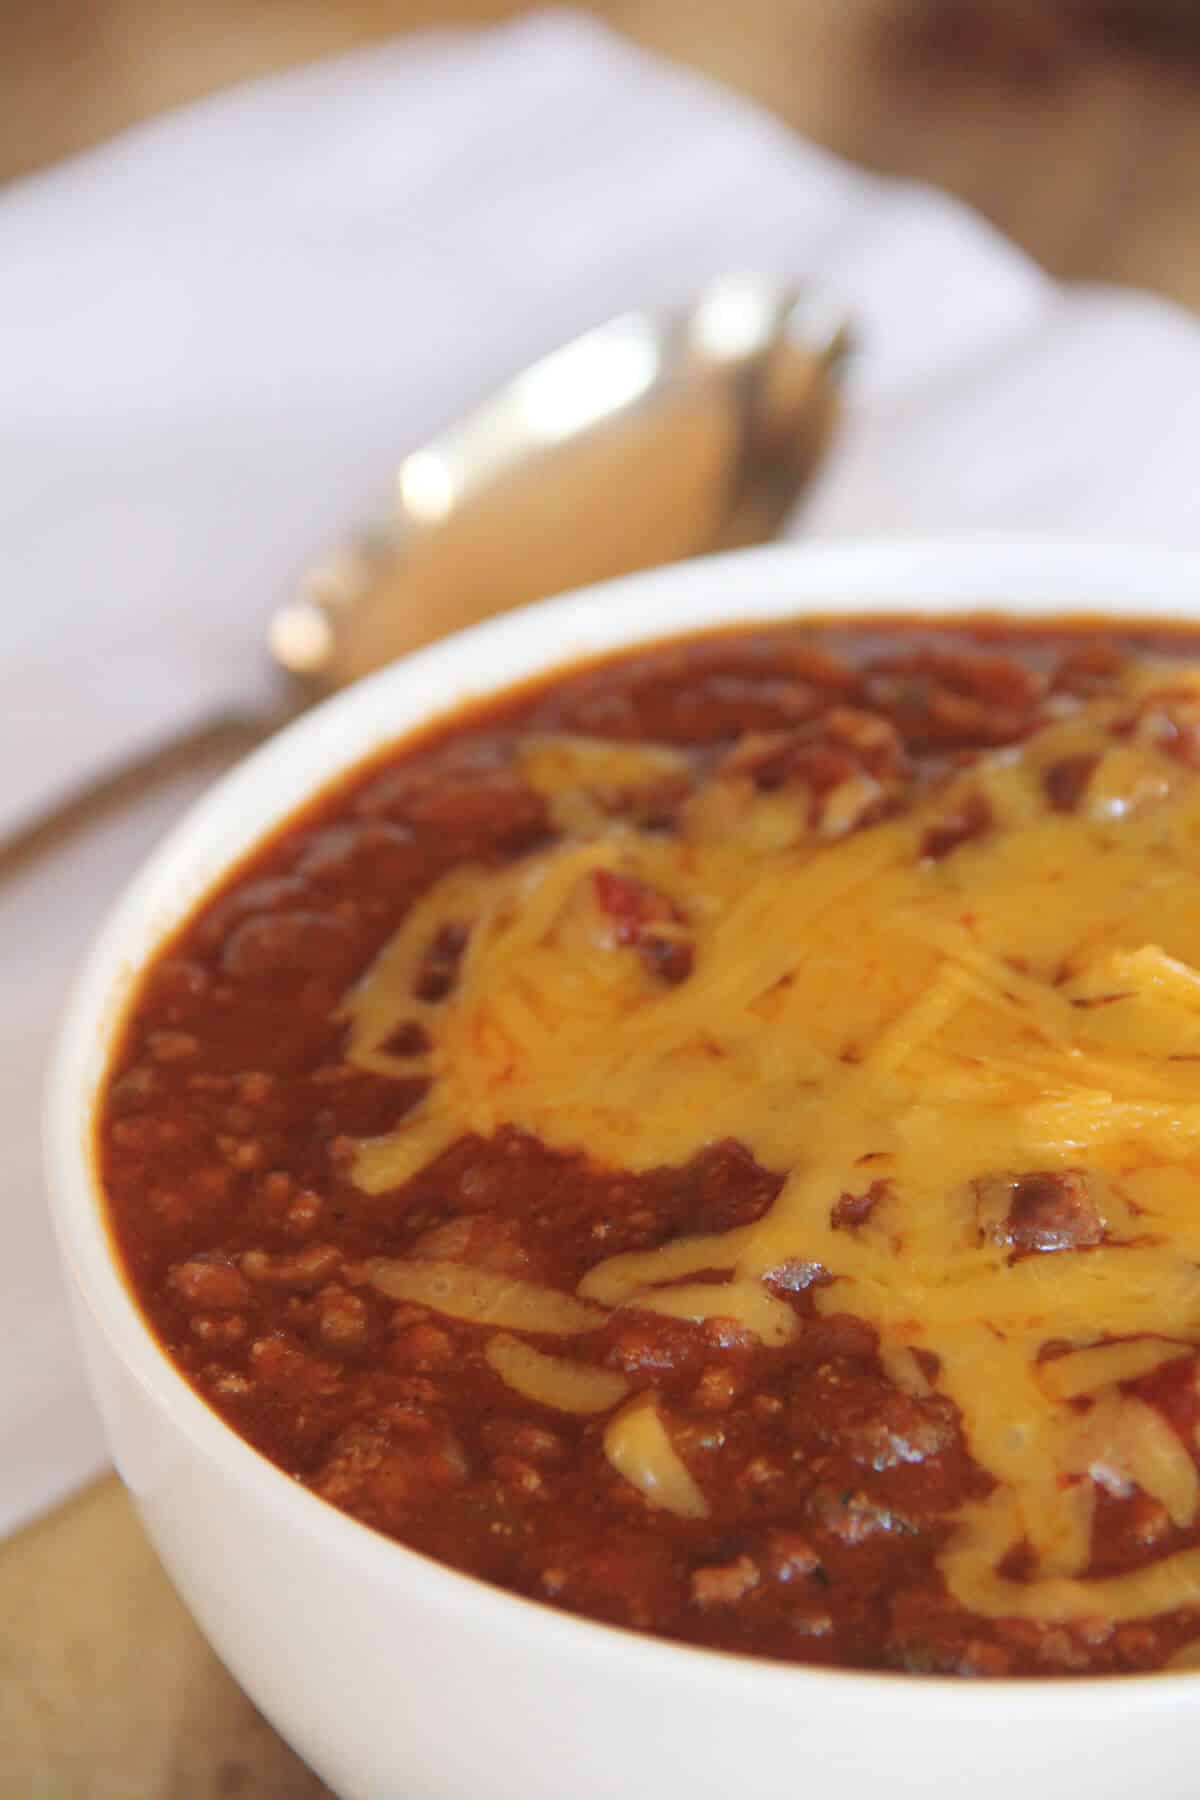 A bowl of chili with cheese.